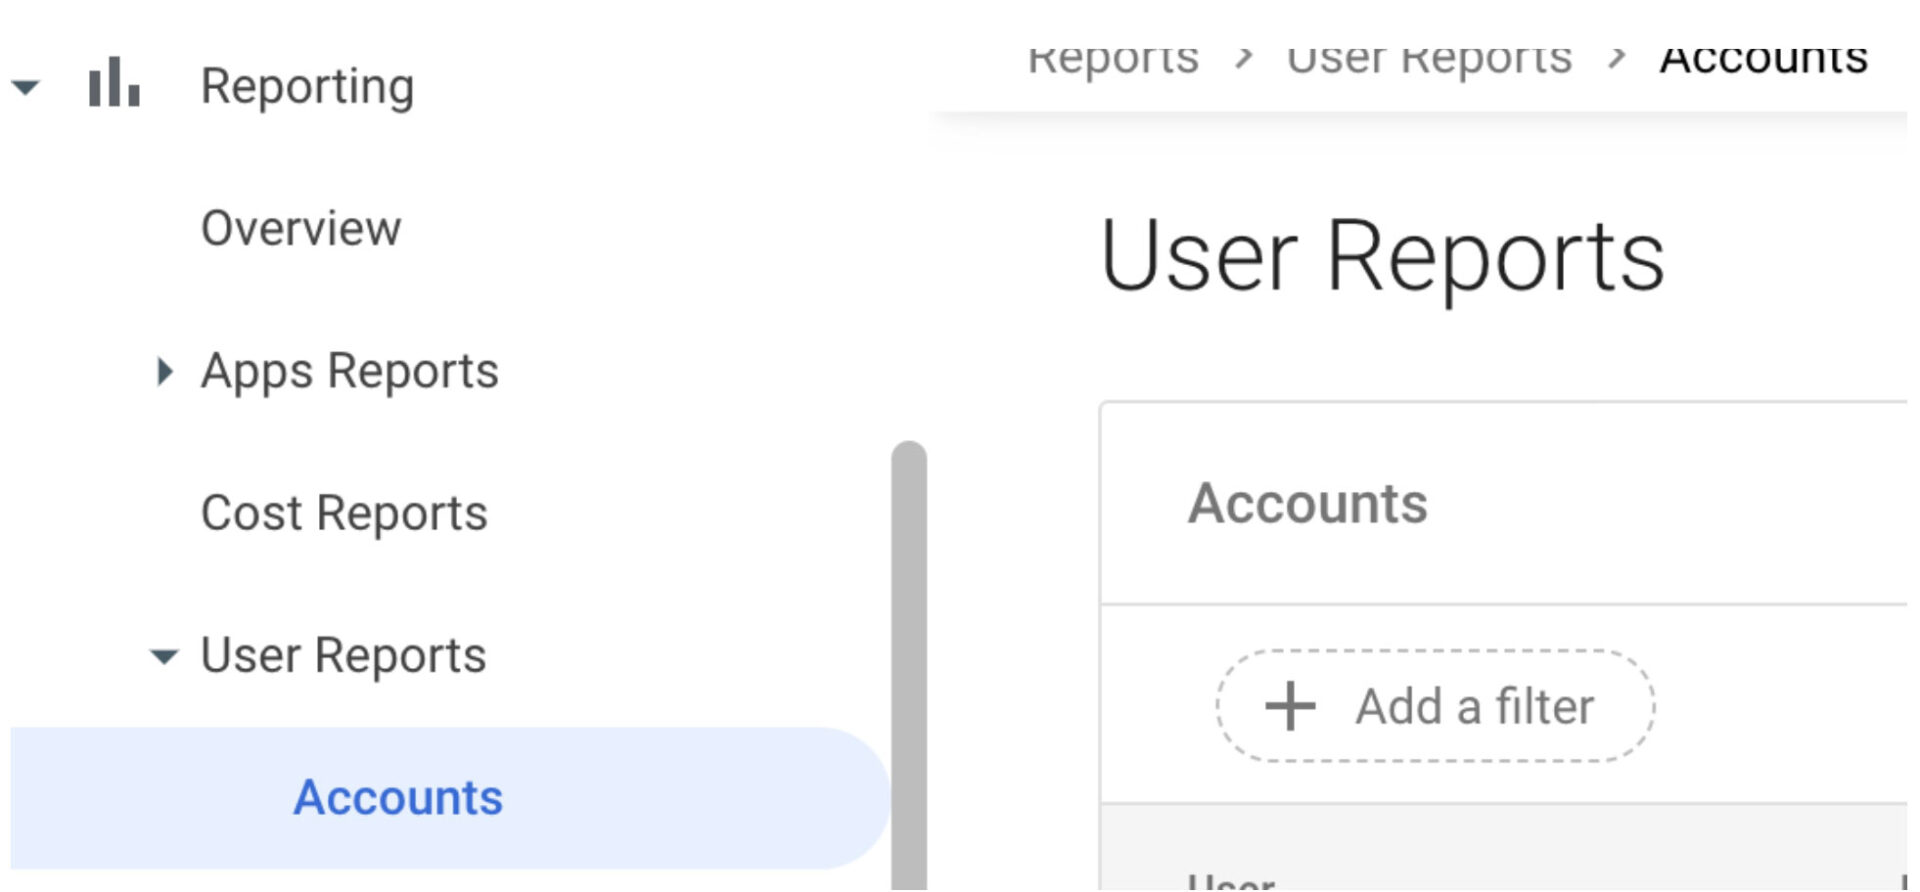 user reports - UpCurve Cloud